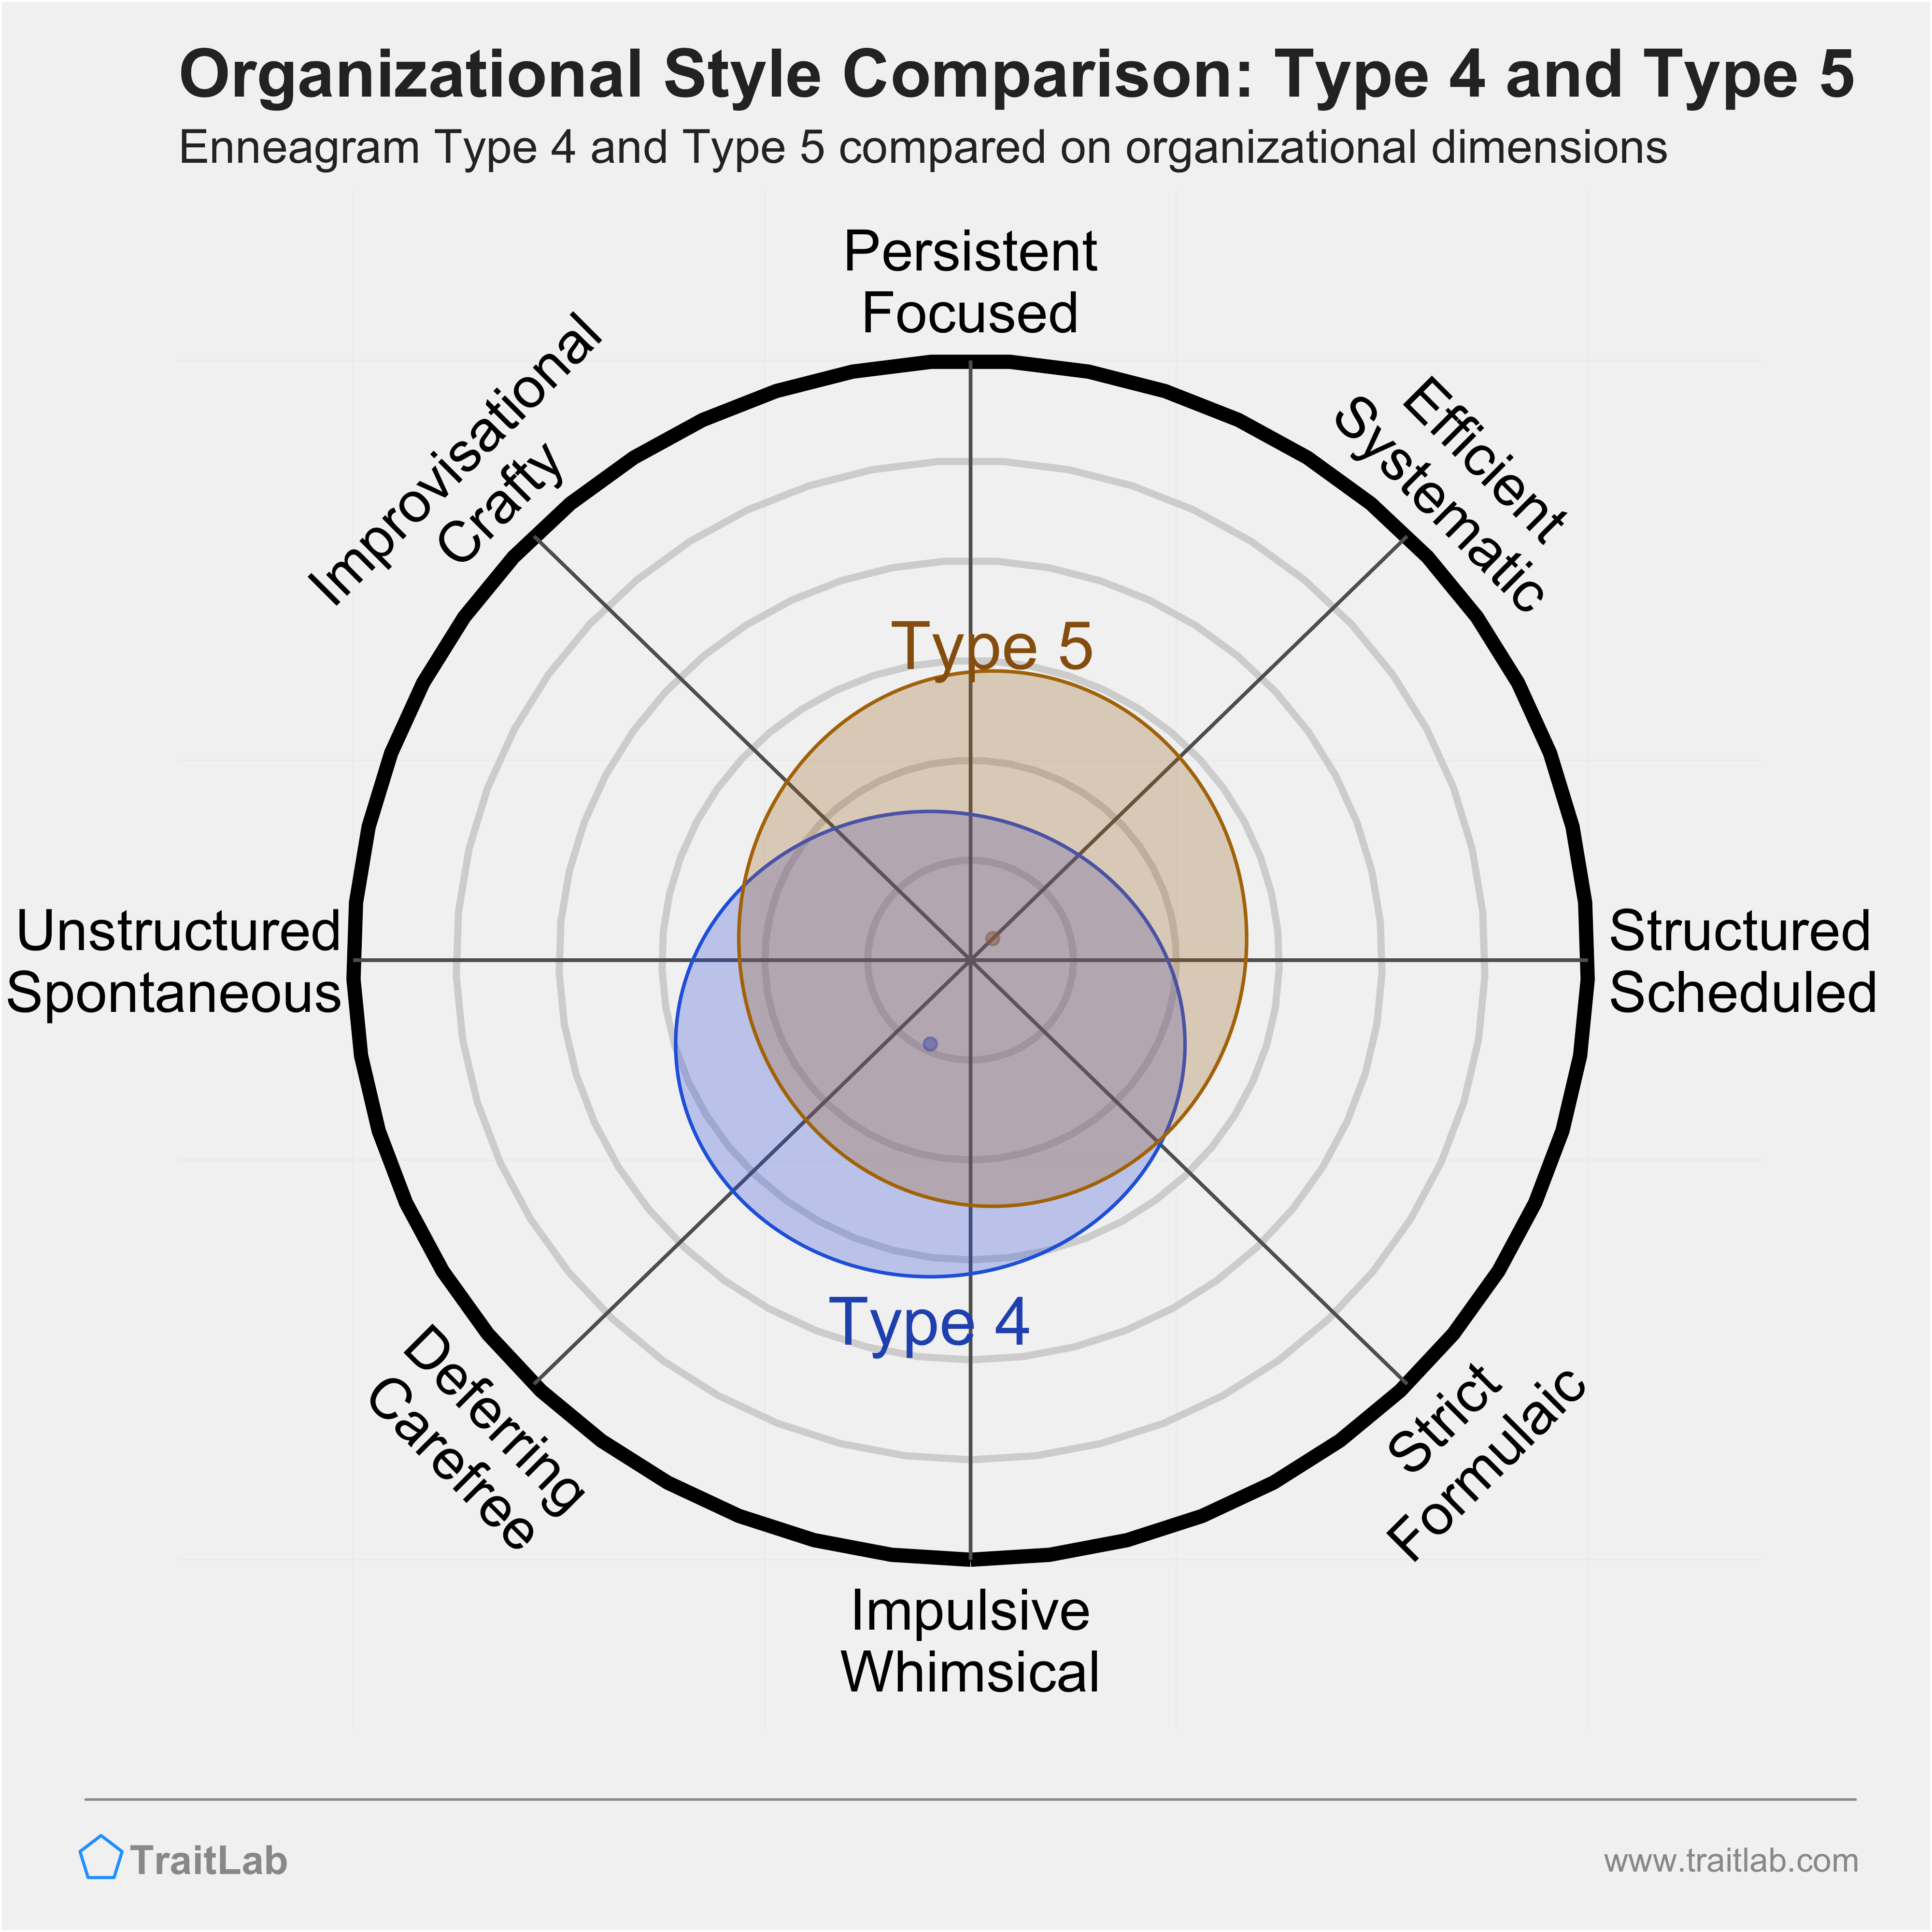 Type 4 and Type 5 comparison across organizational dimensions